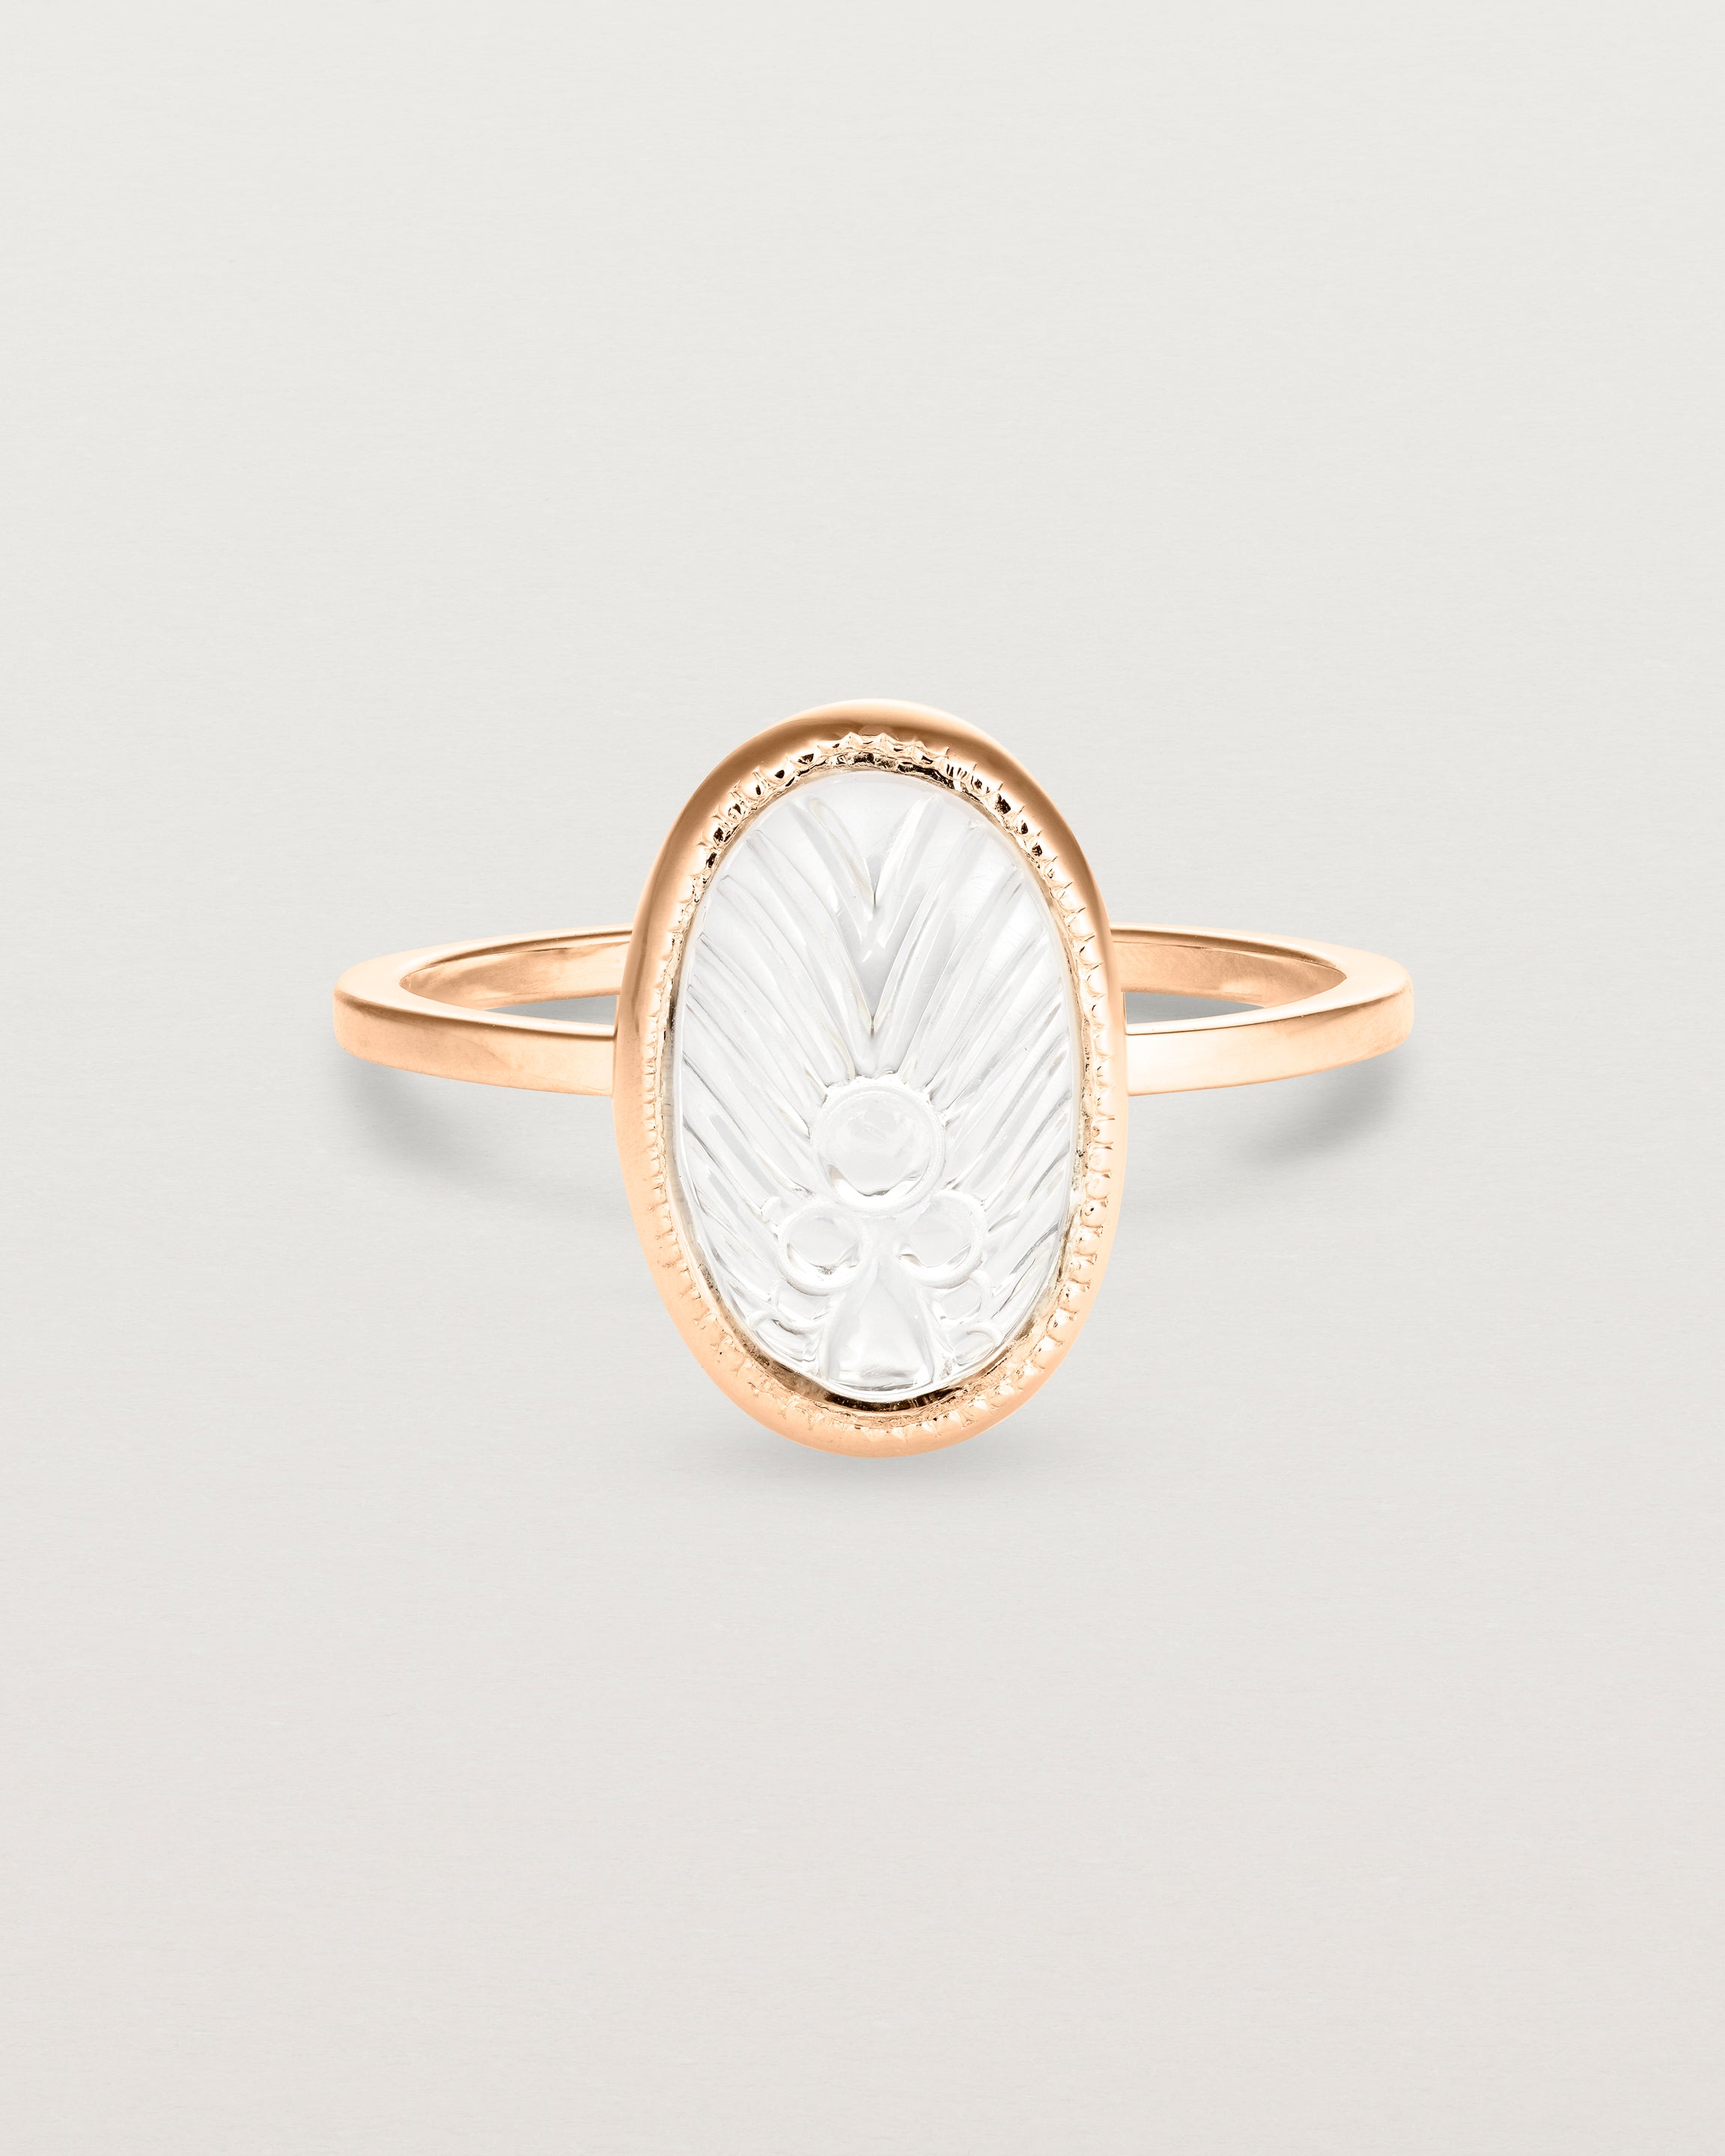 Front view of the Ruan Ring | Carved Quartz in rose gold.